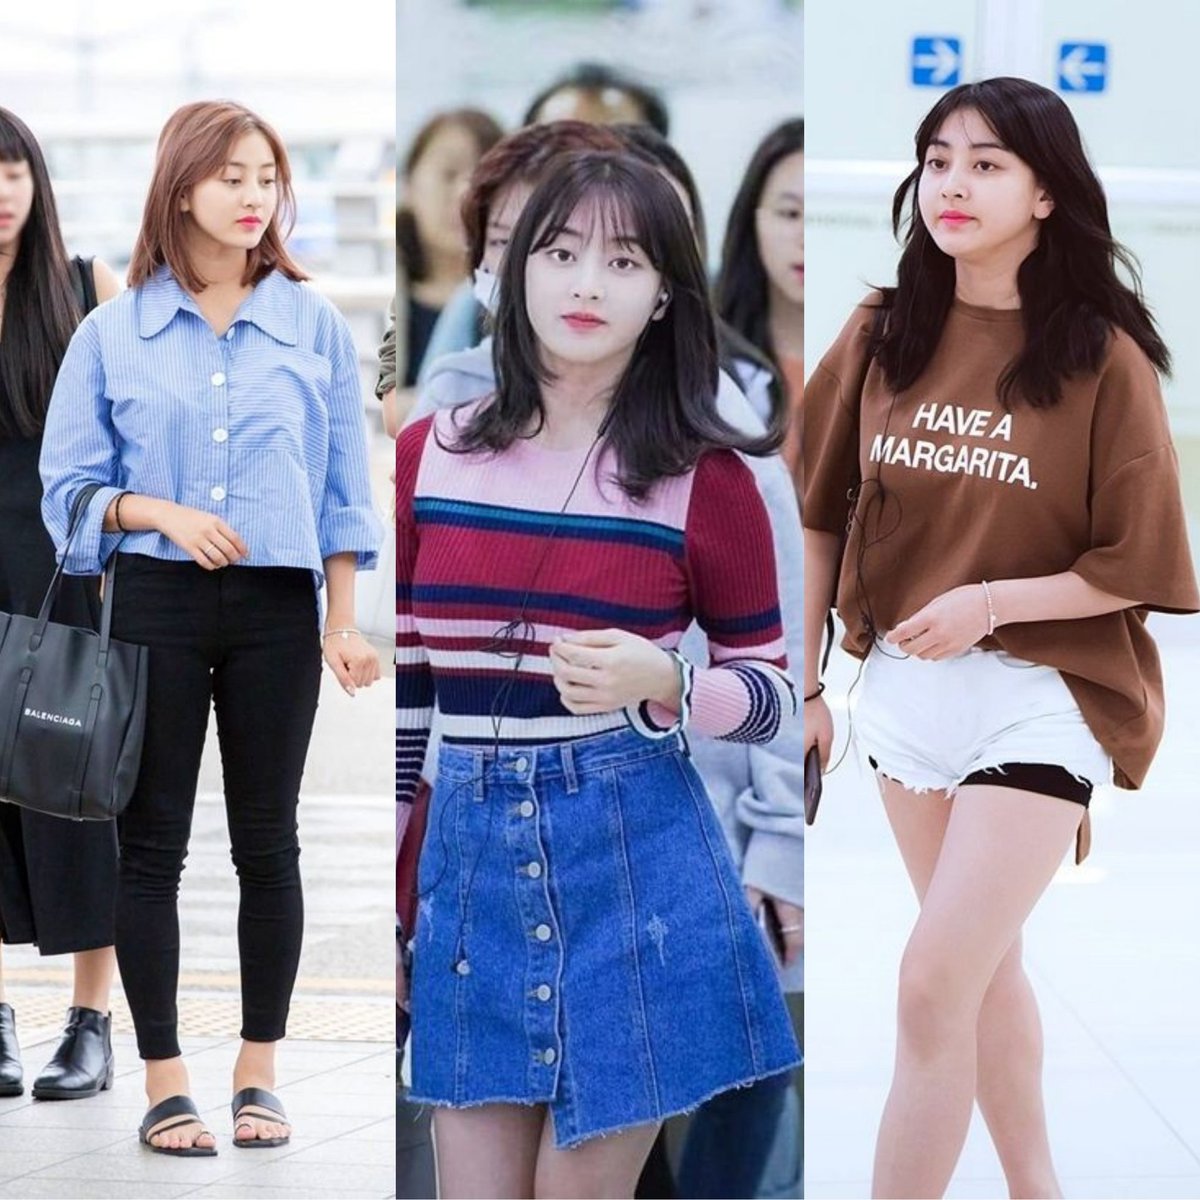 jihyo in her daily outfits hit harder.